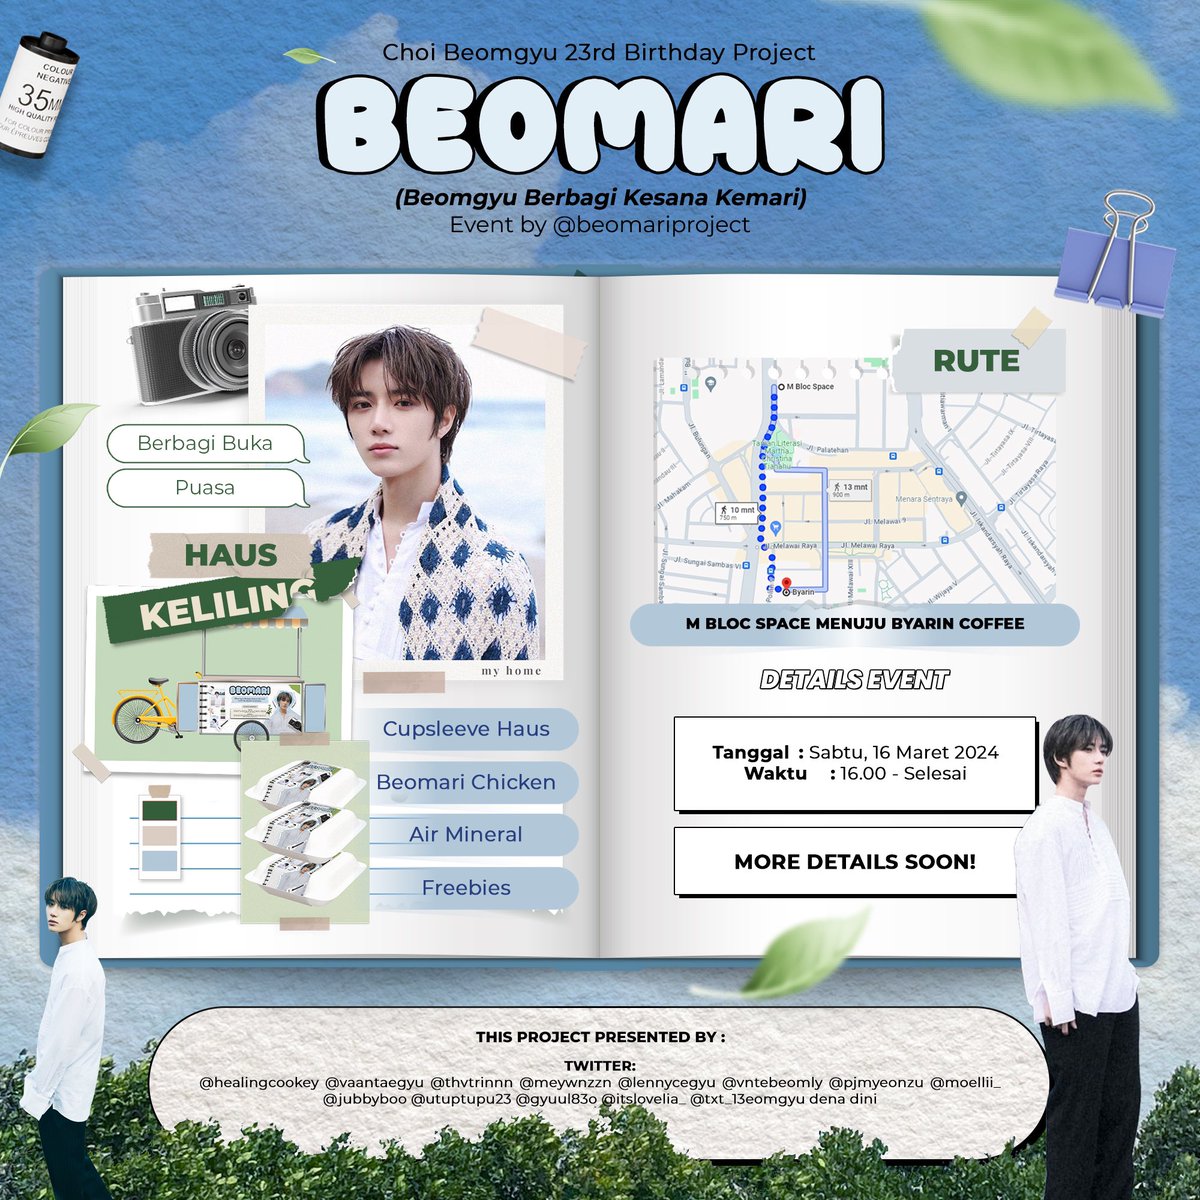 —  𝐁𝐞𝐨𝐦𝐚𝐫𝐢 (@beomariproject) : 
Be sure to tune in for the fun at blessing sharing event with Beomari Project! don't worry because we provide it for 𝗙𝗥𝗘𝗘 🧸💗 

#Beomgyu_Berbagi
#BeomariProject
#Beomgyu_ActOfKindness
#BeomgyuBirthdayProject